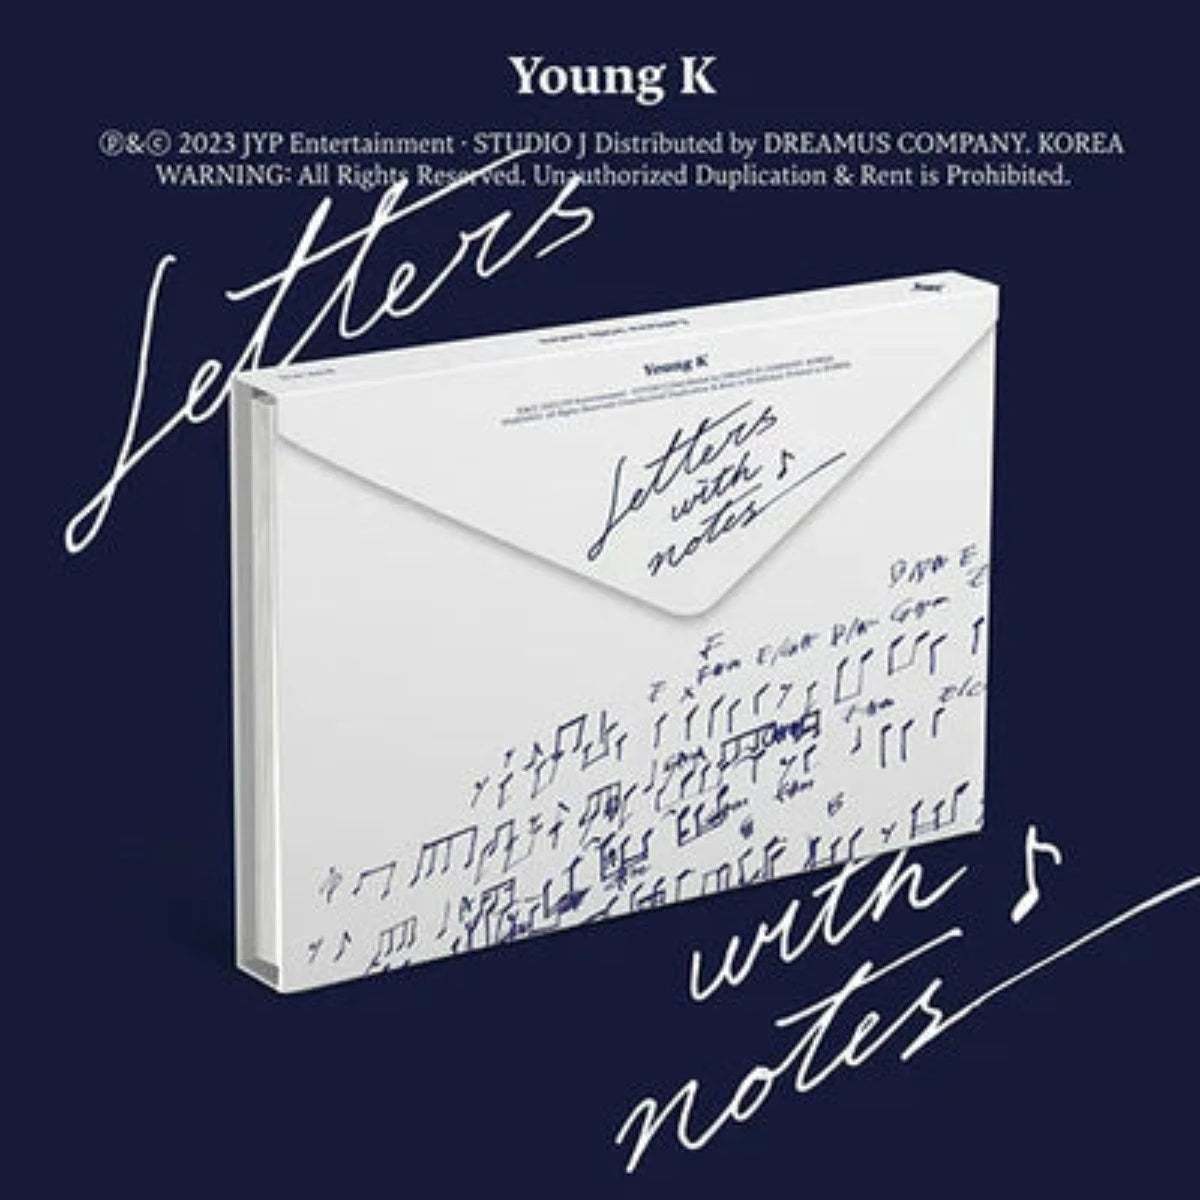 DAY6: Young K Vol. 1 - Letters with notes (Standard Version)